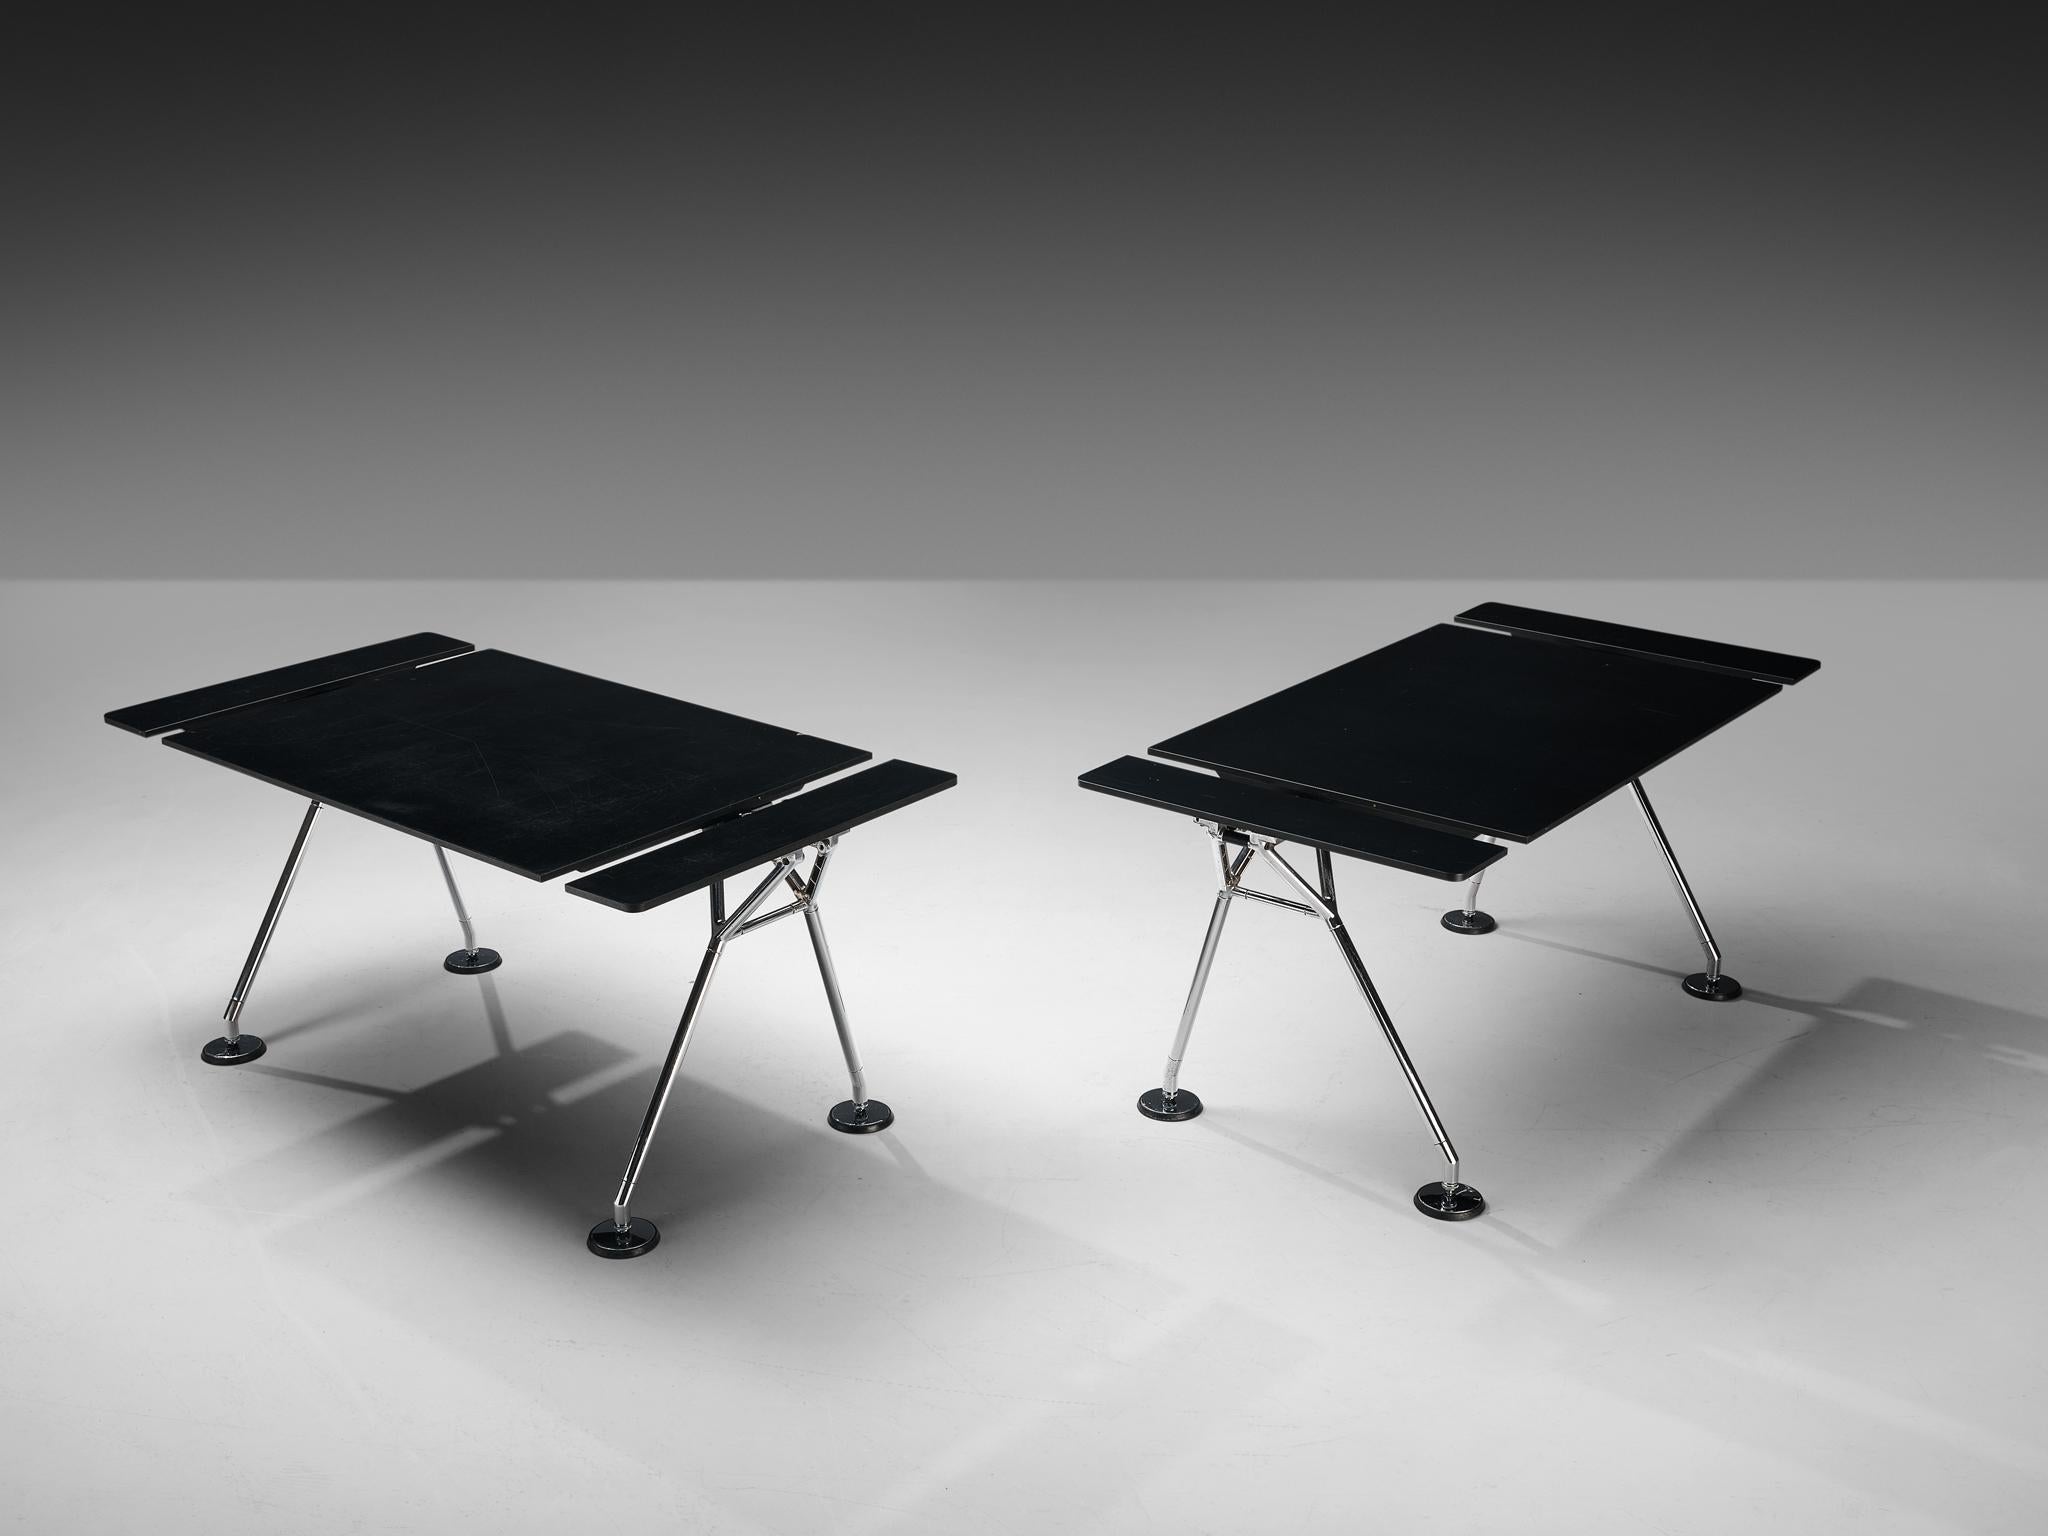 Norman Foster for Tecno, ‘Nomos’ desks or dining tables, wood, metal, Italy, design 1980s.

The ‘Nomos’ tables are designed by Norman Forster, manufactured by Tecno, and are characterized by the stunning design of the base. Like Norman Foster said